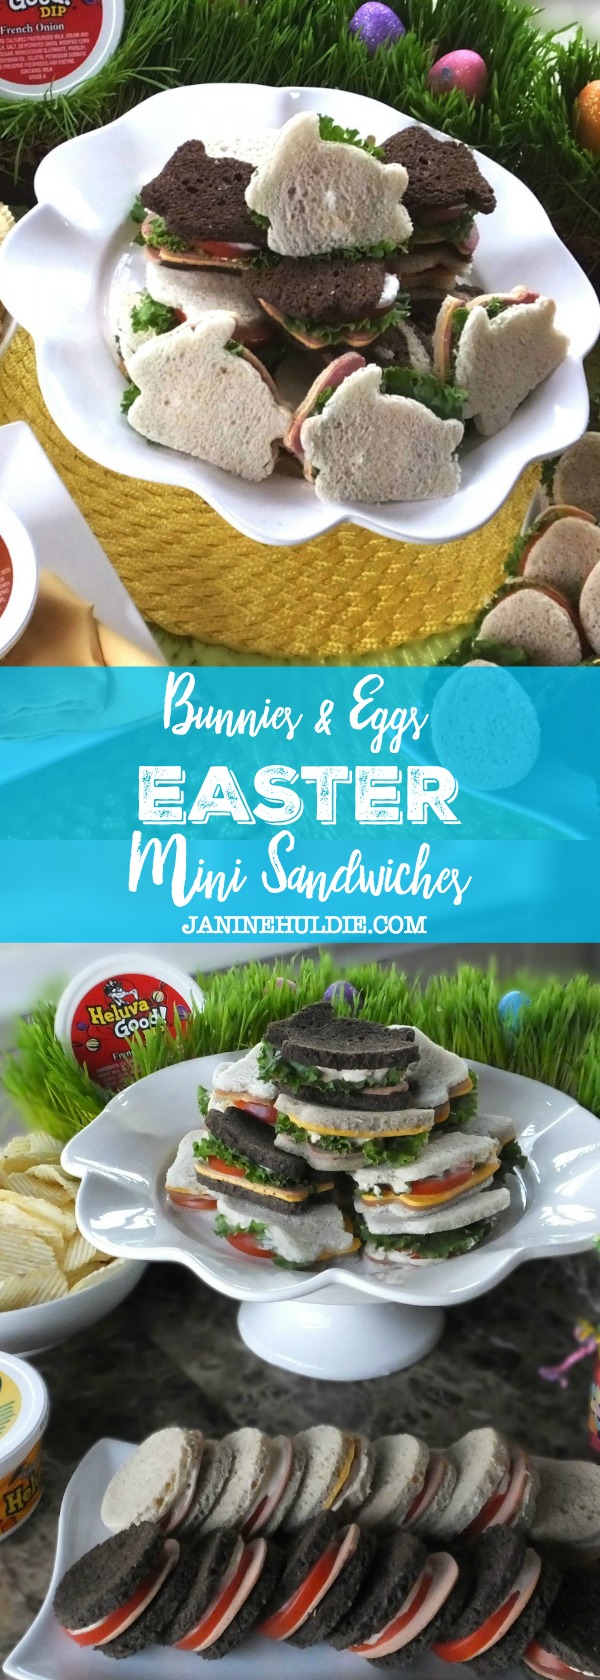 Bunnies and Eggs Easter Mini Sandwiches